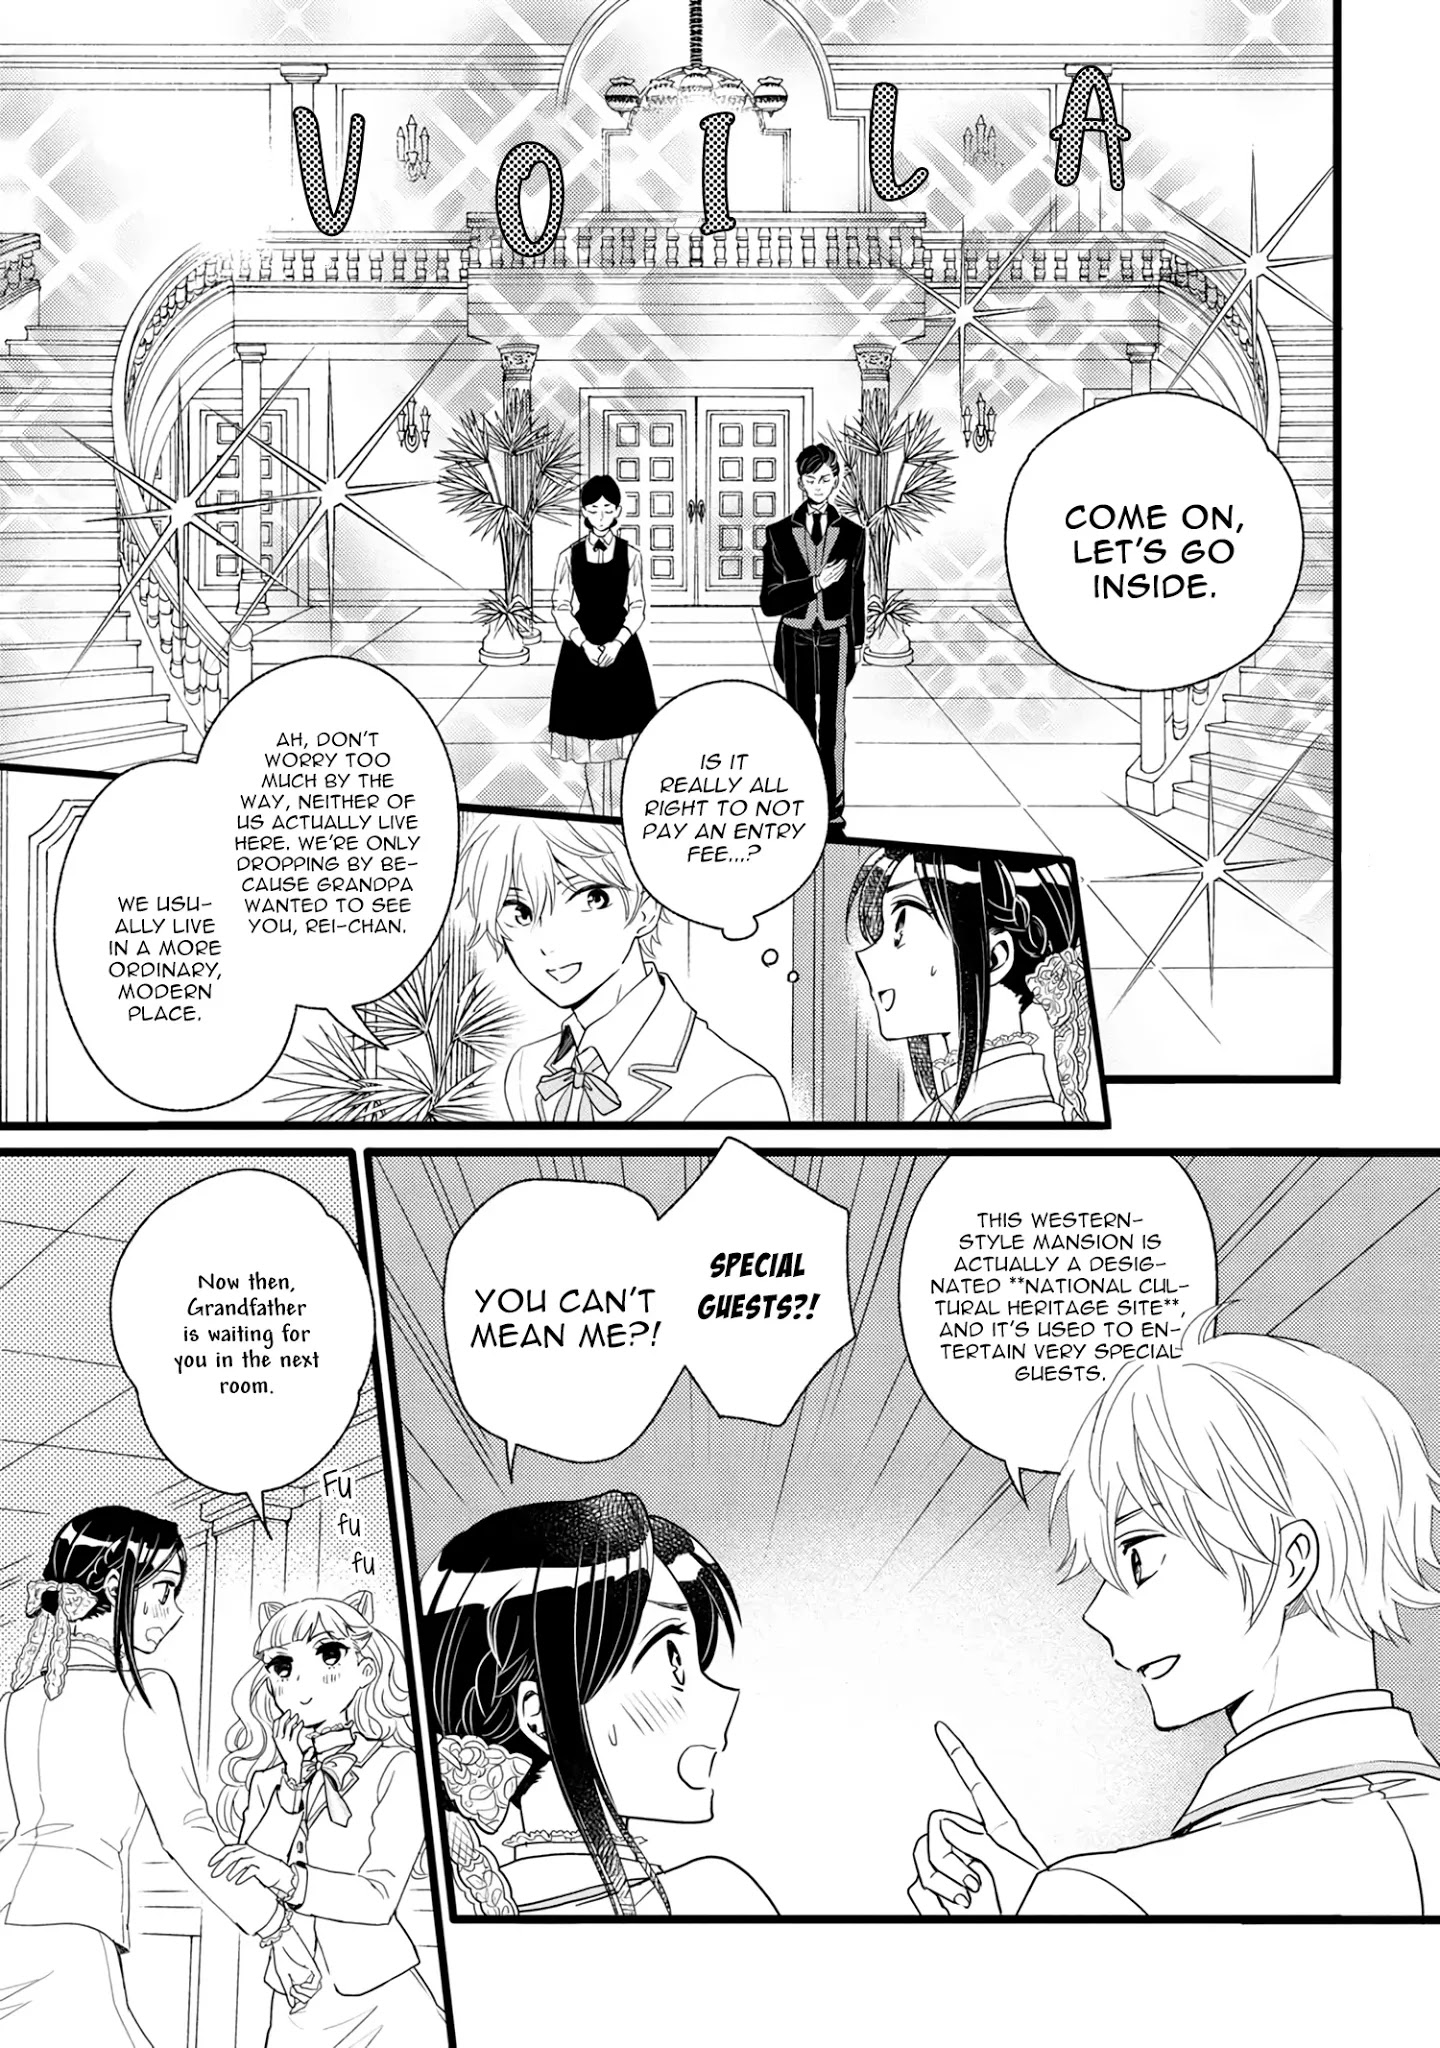 Reiko's Style: Despite Being Mistaken For A Rich Villainess, She's Actually Just Penniless - Page 1